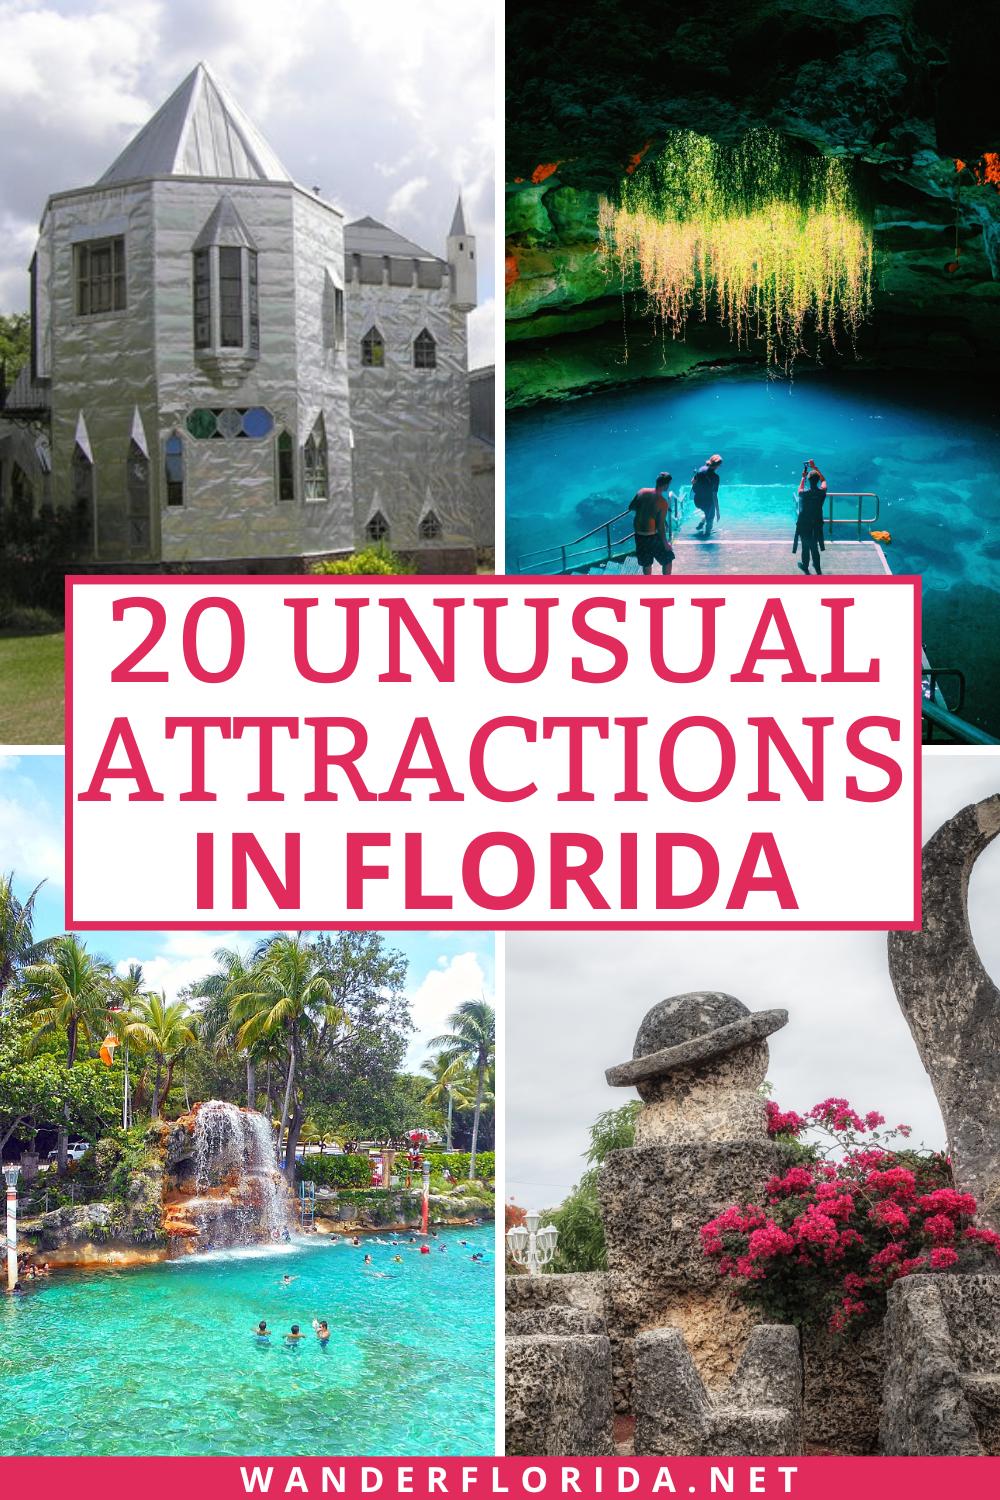 20 Most Unusual Attractions in Florida